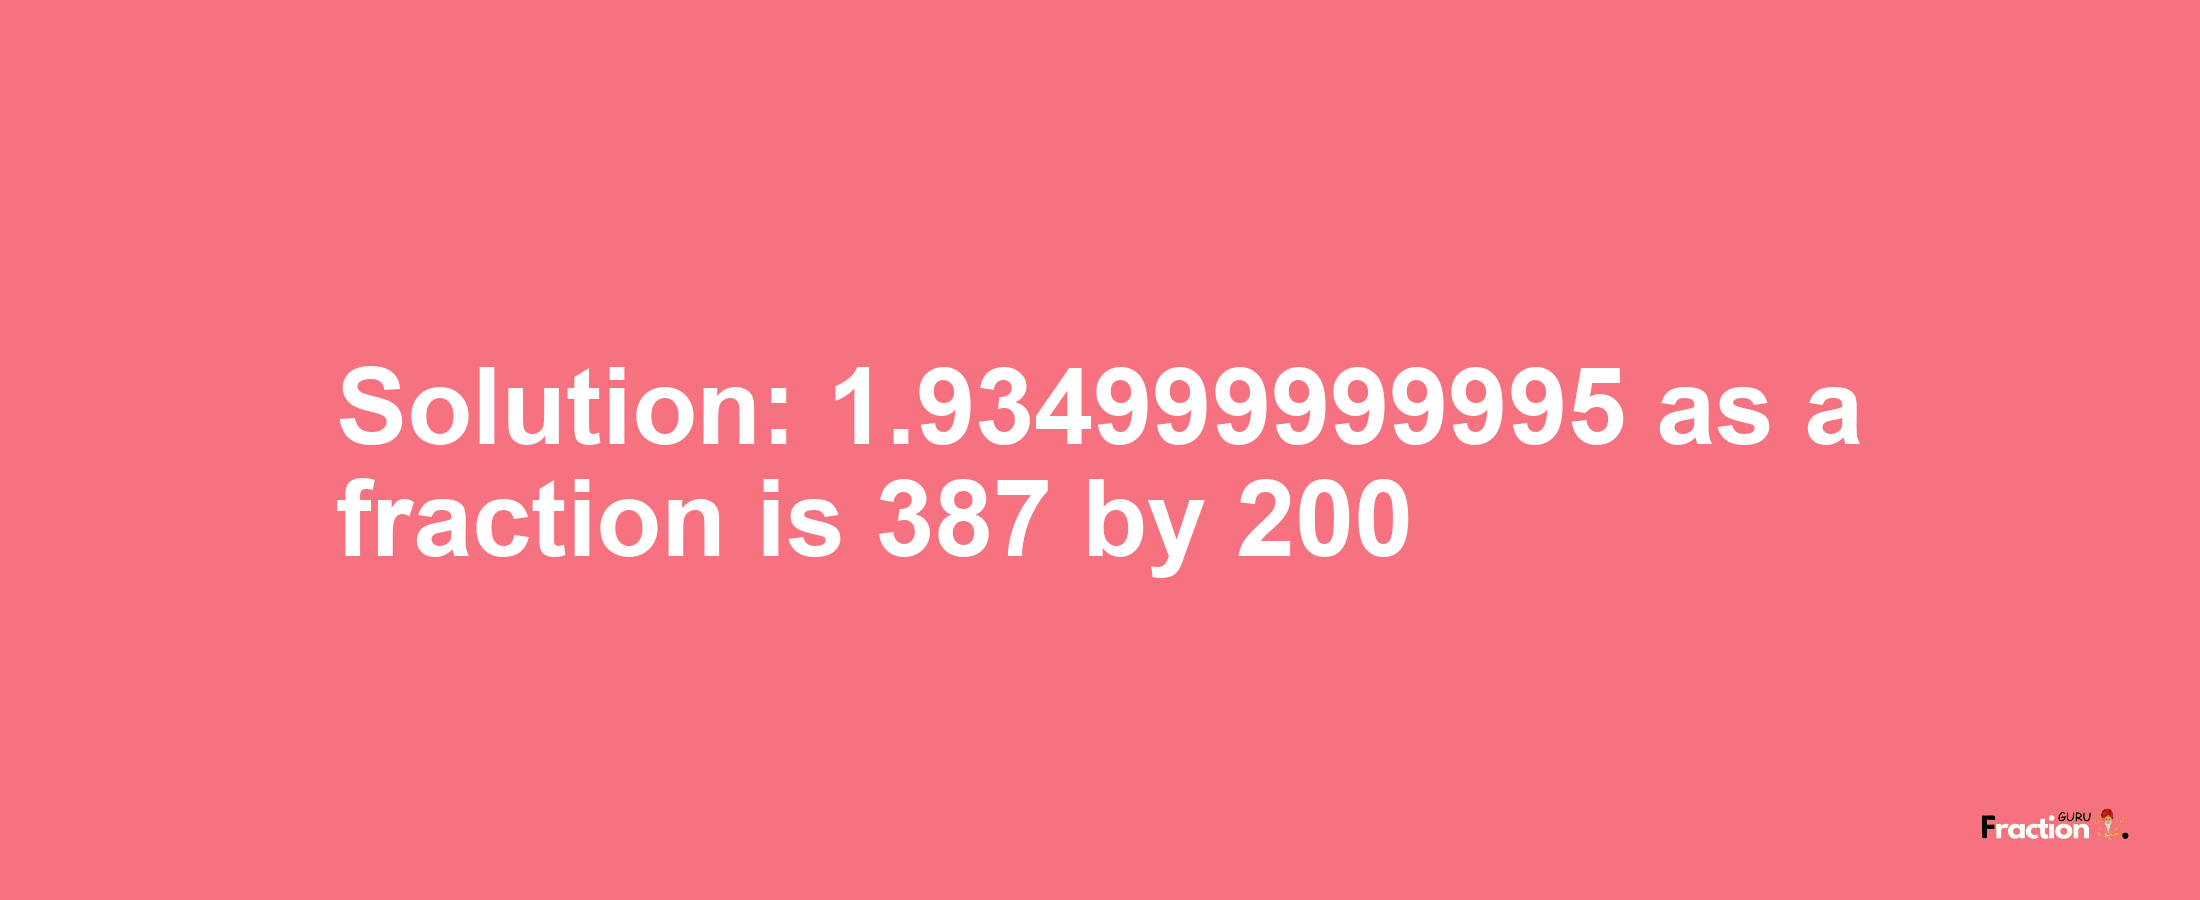 Solution:1.934999999995 as a fraction is 387/200